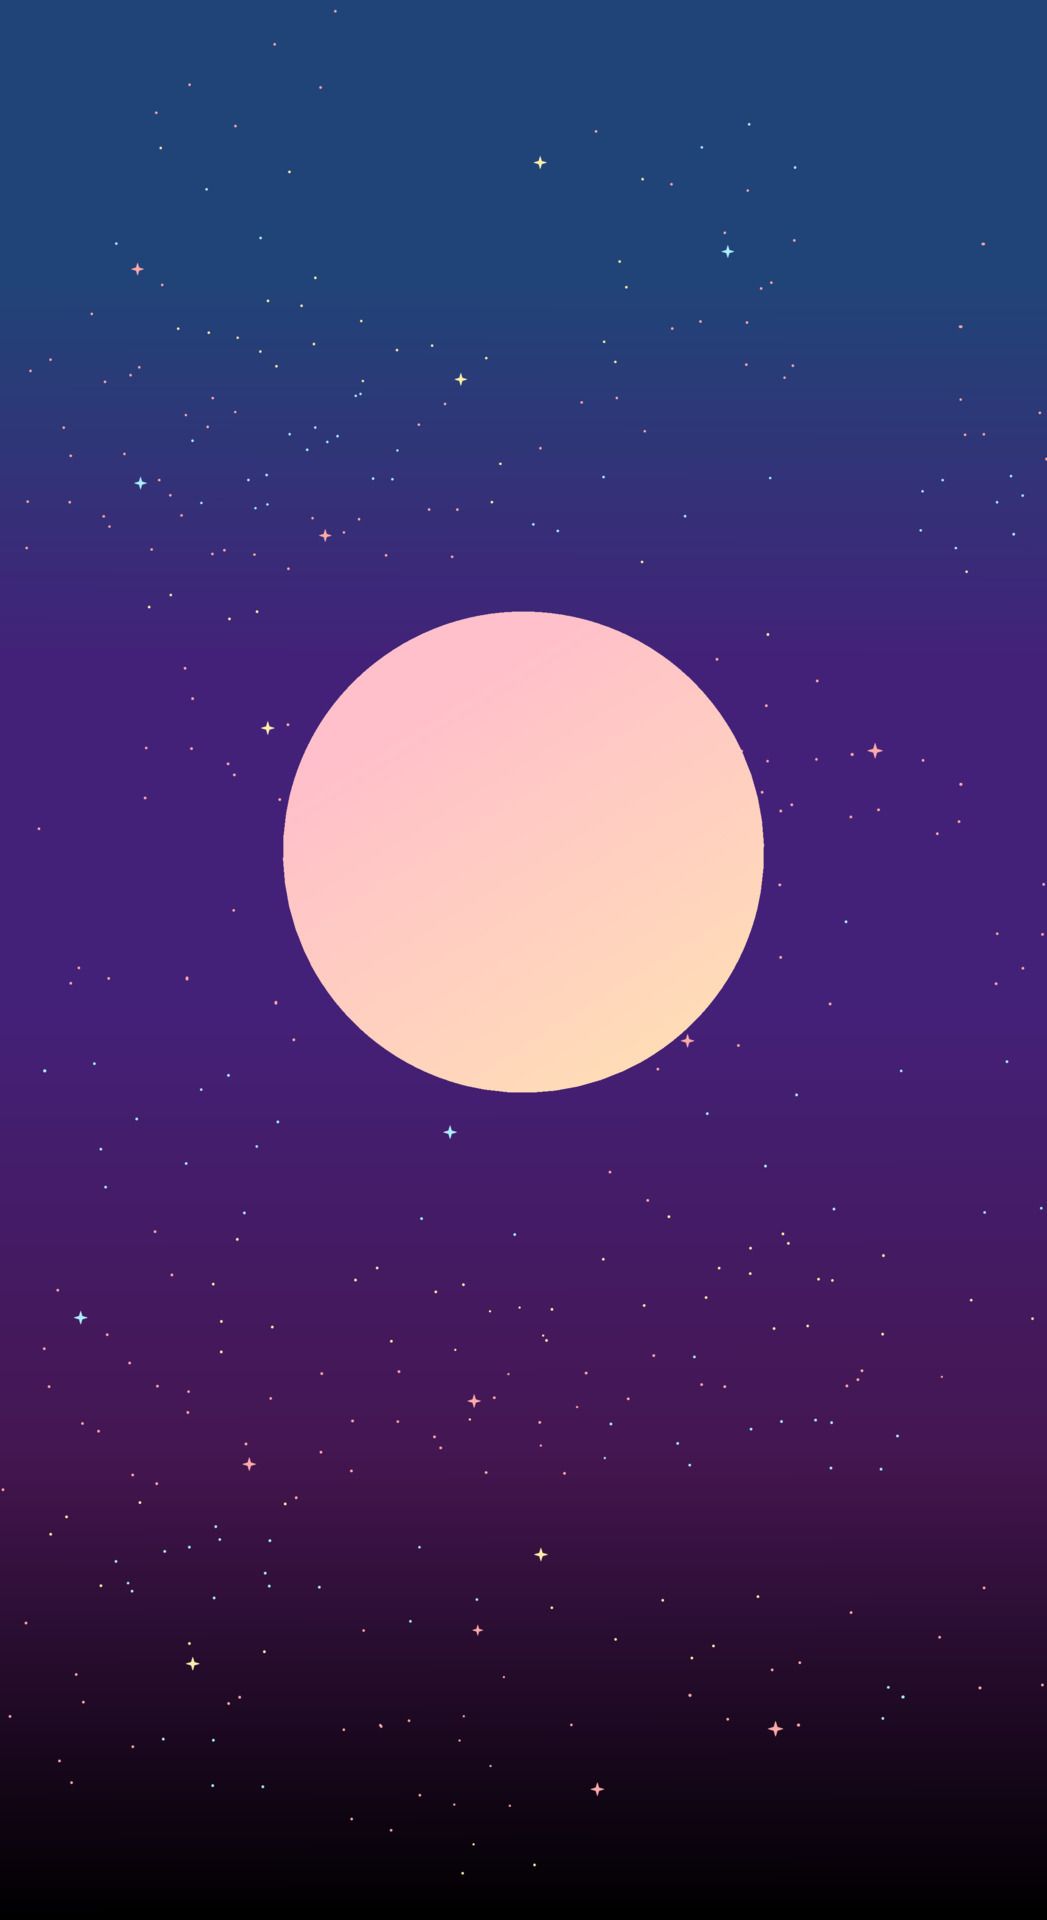 A purple and blue sky with stars - Planet